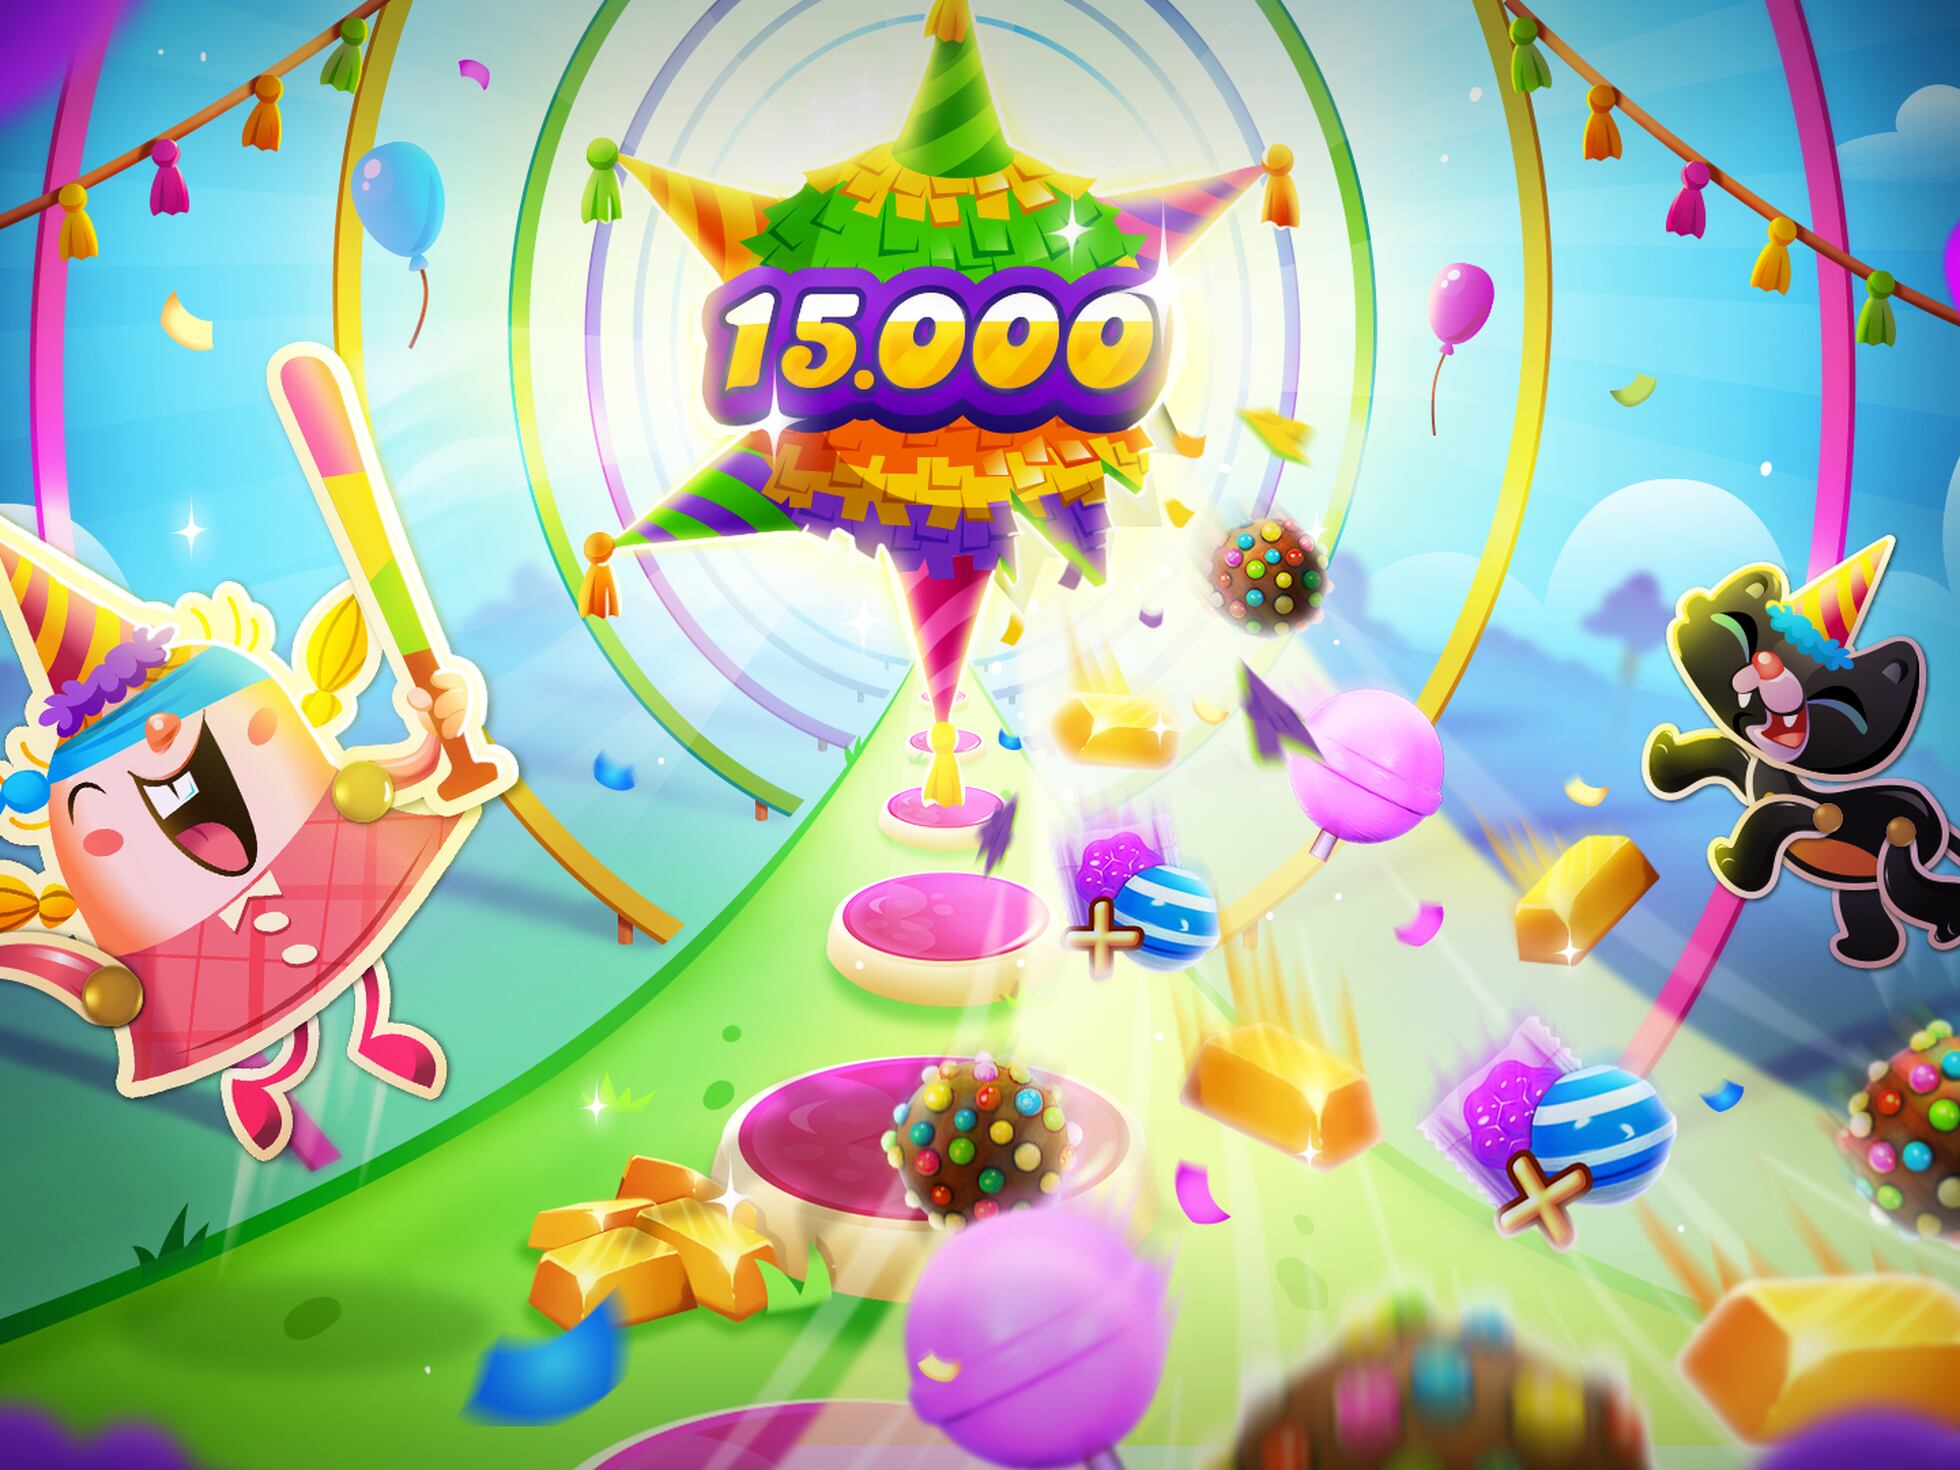 Interesting Facts About Candy Crush